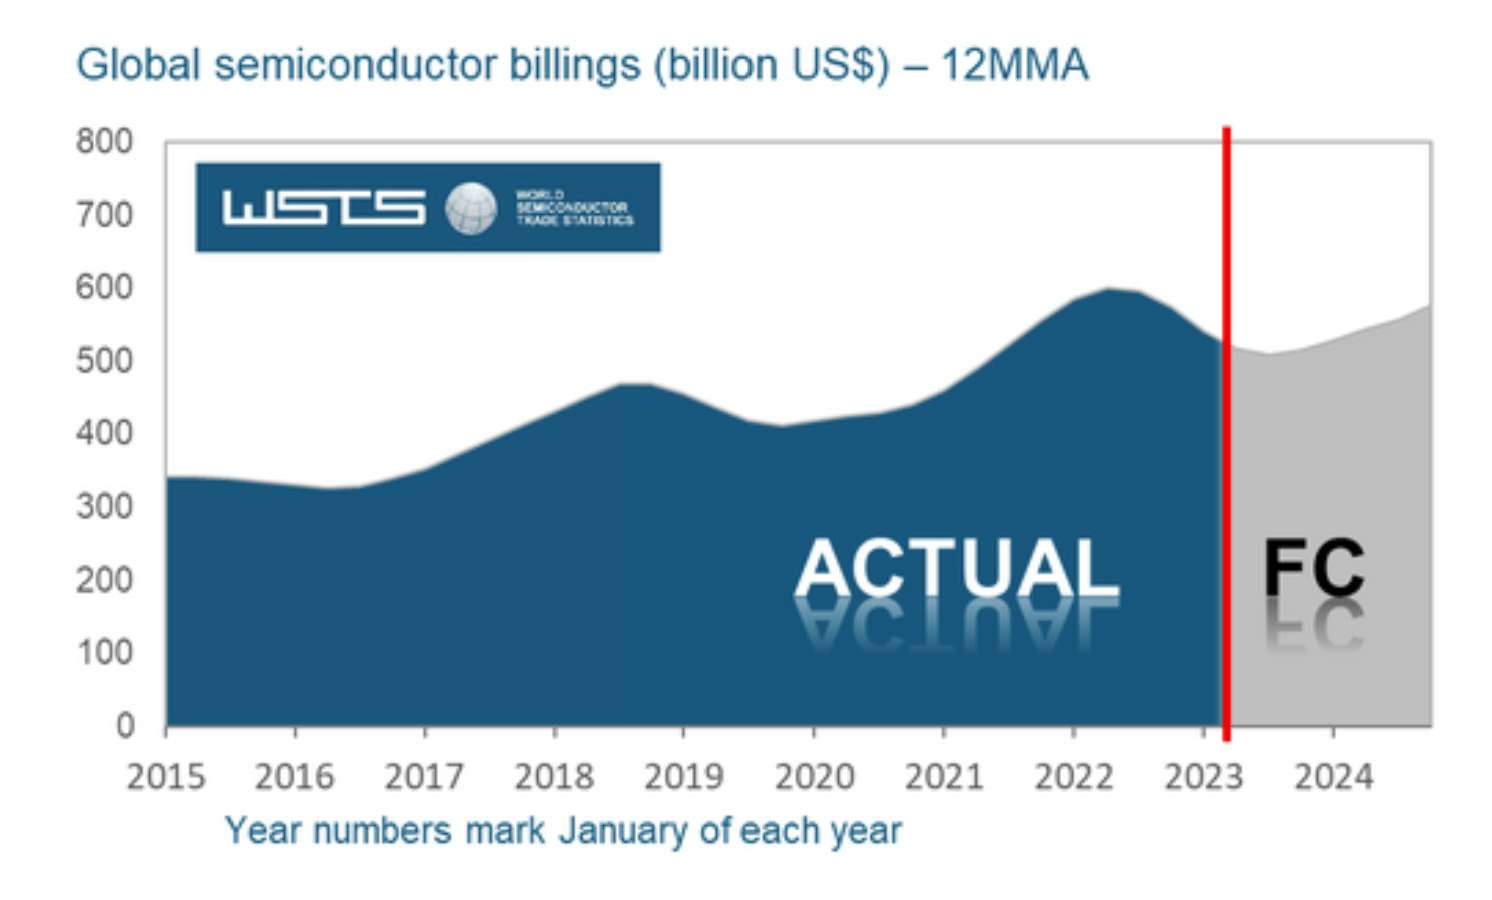 Semiconductor industry may dip in 2023, but rebound expected in 2024